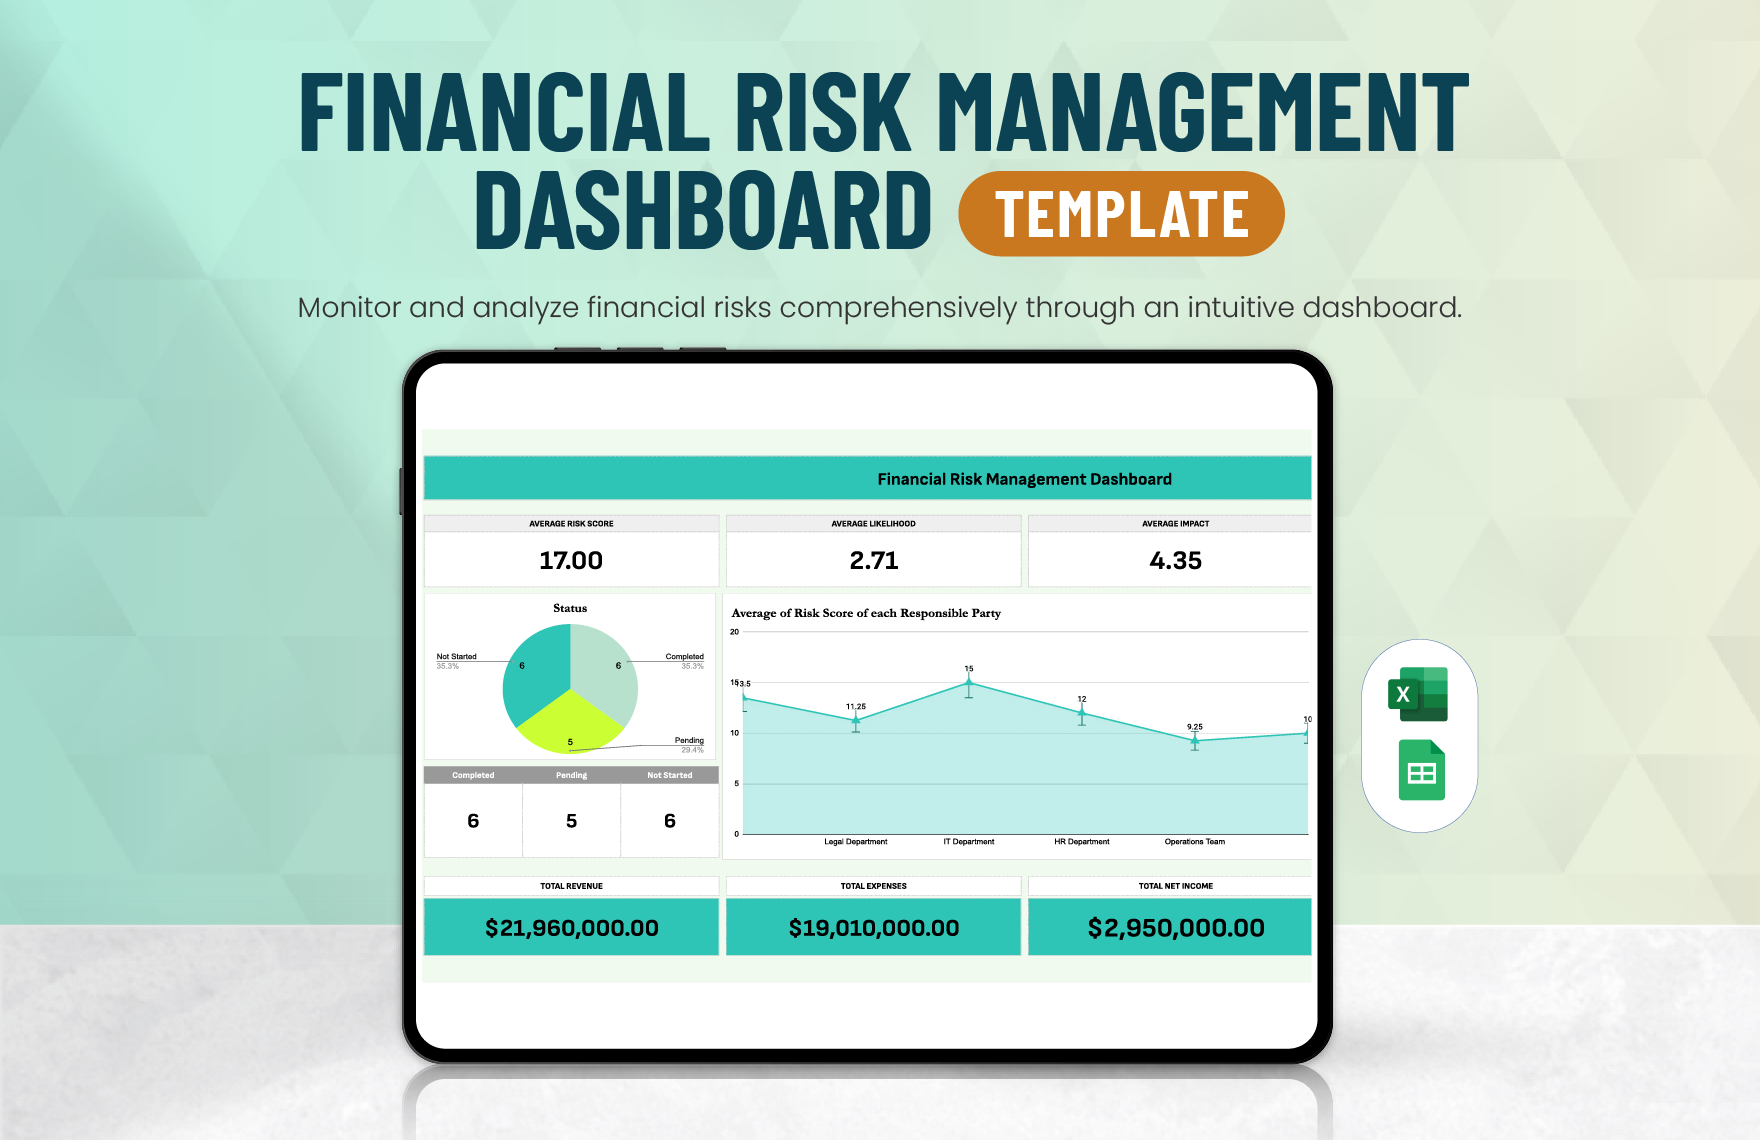 Financial Risk Management Dashboard Template in Excel, Google Sheets